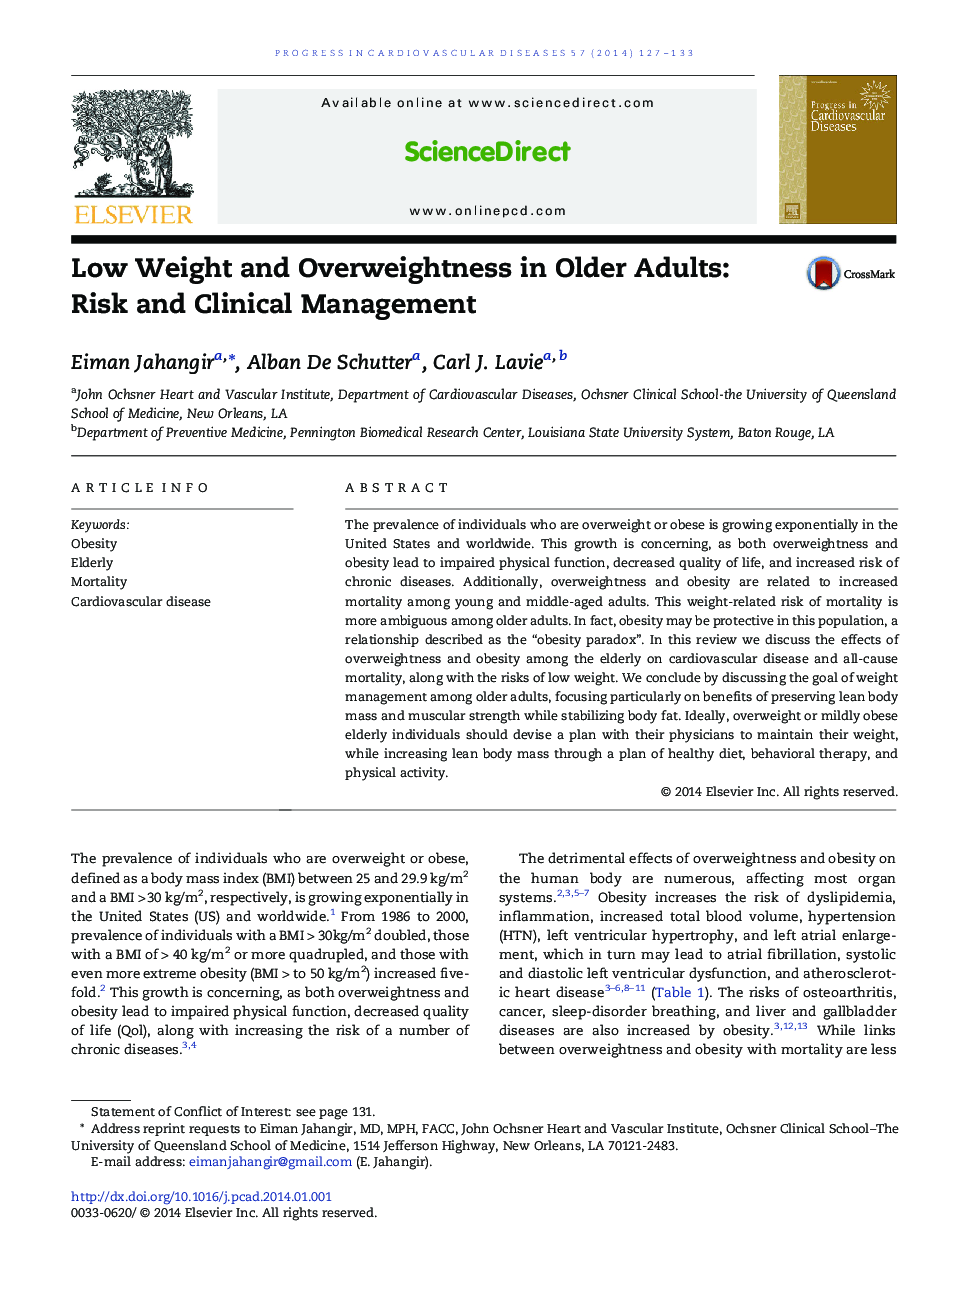 Low Weight and Overweightness in Older Adults: Risk and Clinical Management 